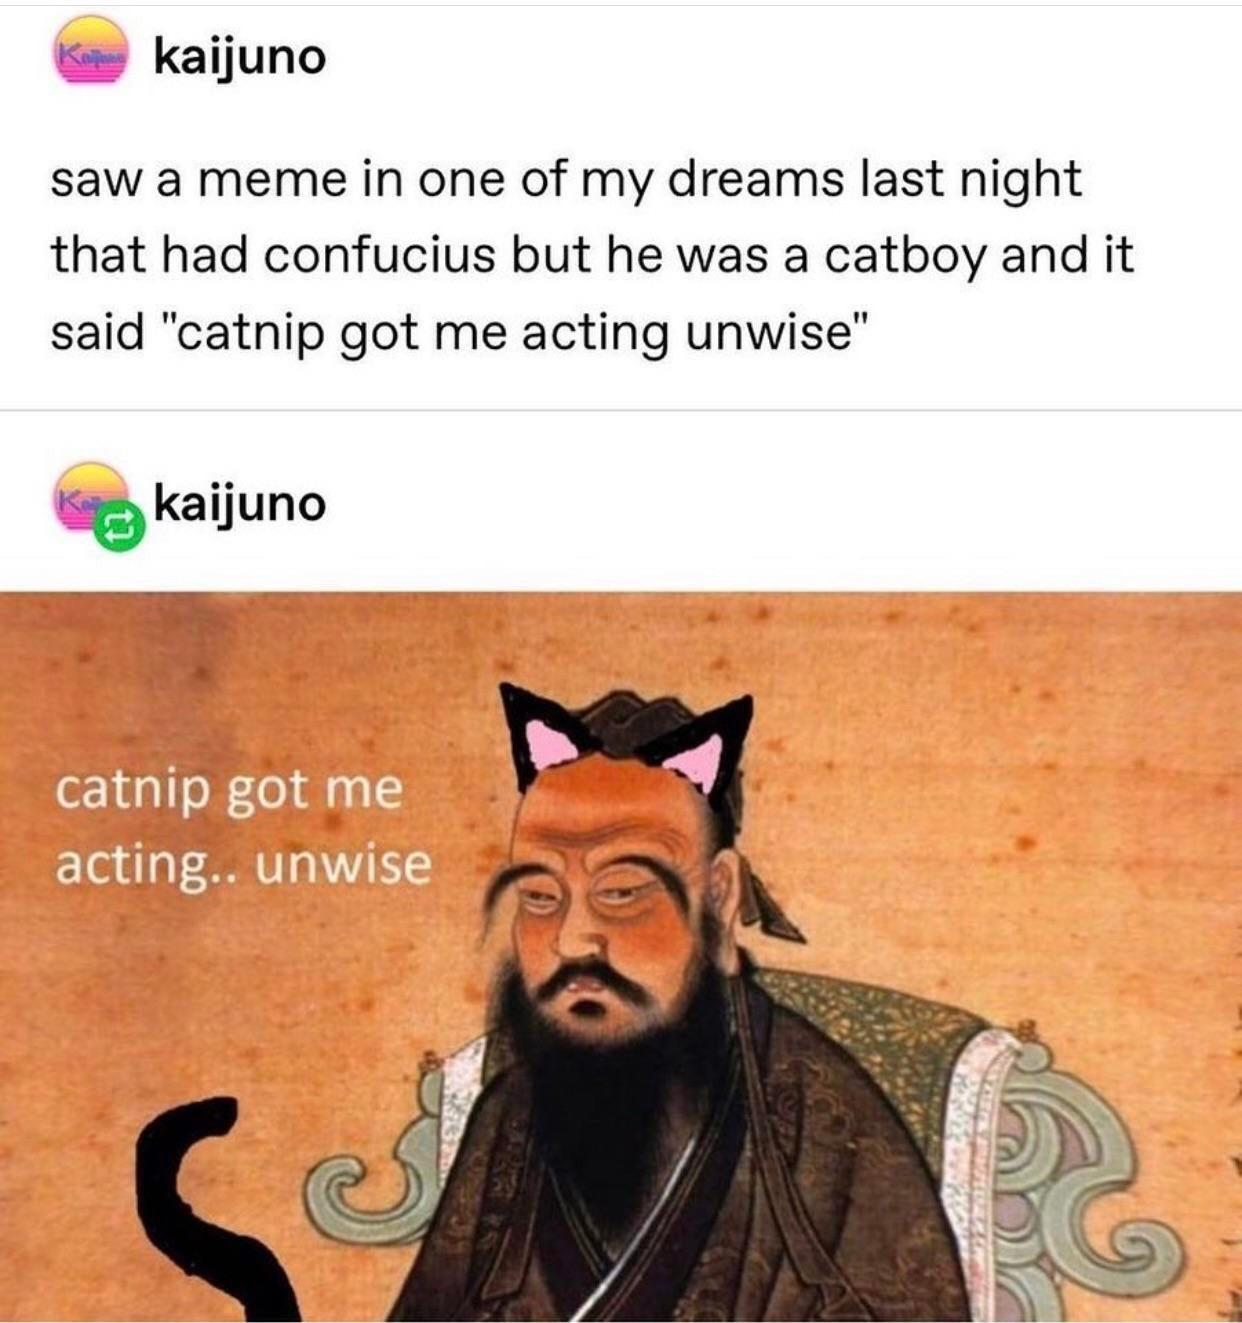 monday morning randomness - catnip got me acting unwise - kaijuno saw a meme in one of my dreams last night that had confucius but he was a catboy and it said "catnip got me acting unwise" kaijuno catnip got me acting.. unwise G